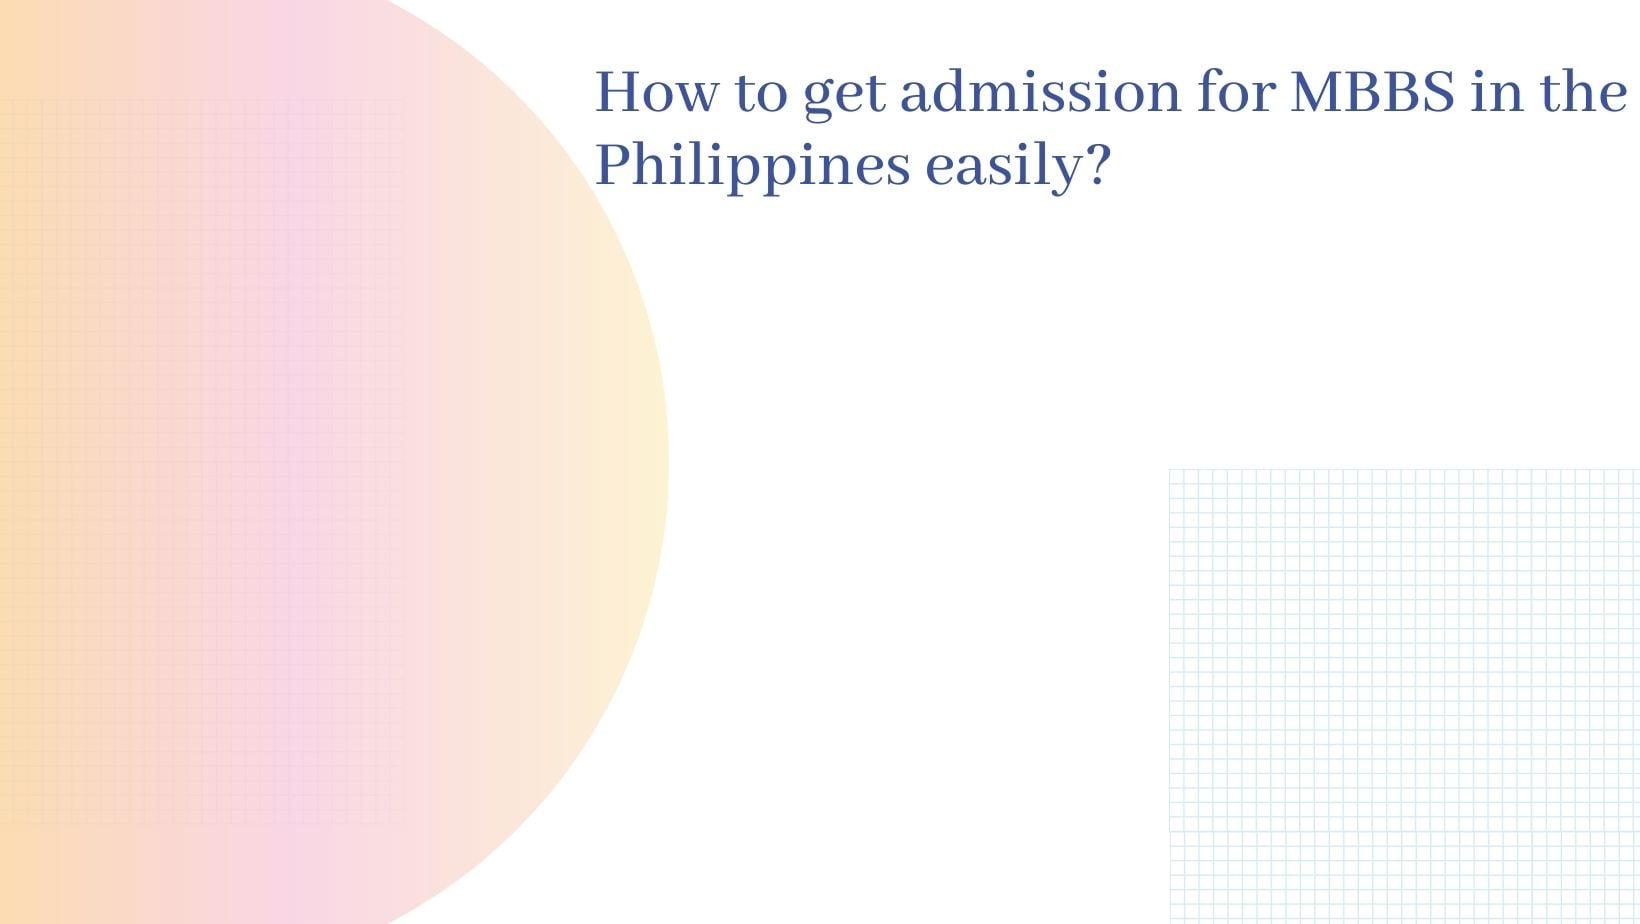 How To Get Admission For MBBS In The Philippines Easily